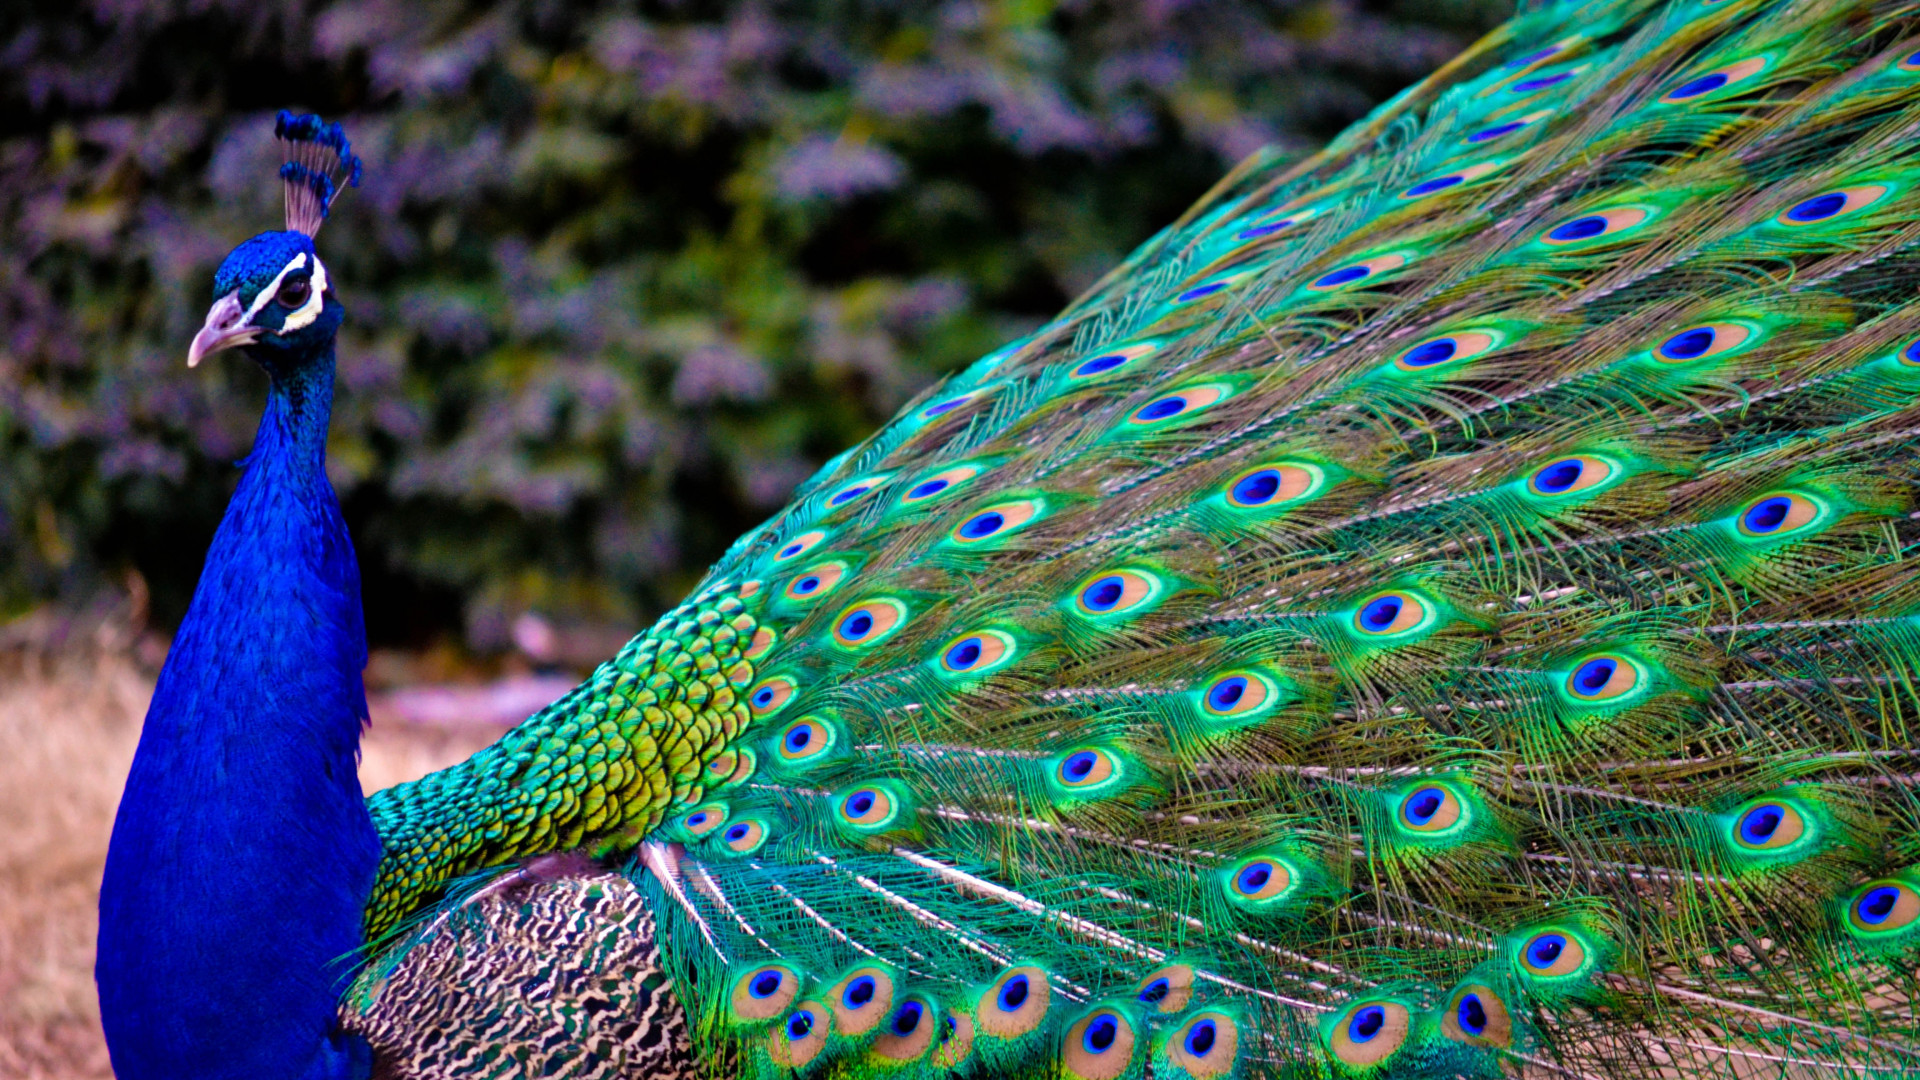 Peacock Feather Hd Wallpaper For Pc - Peacock Wallpaper For Home ...